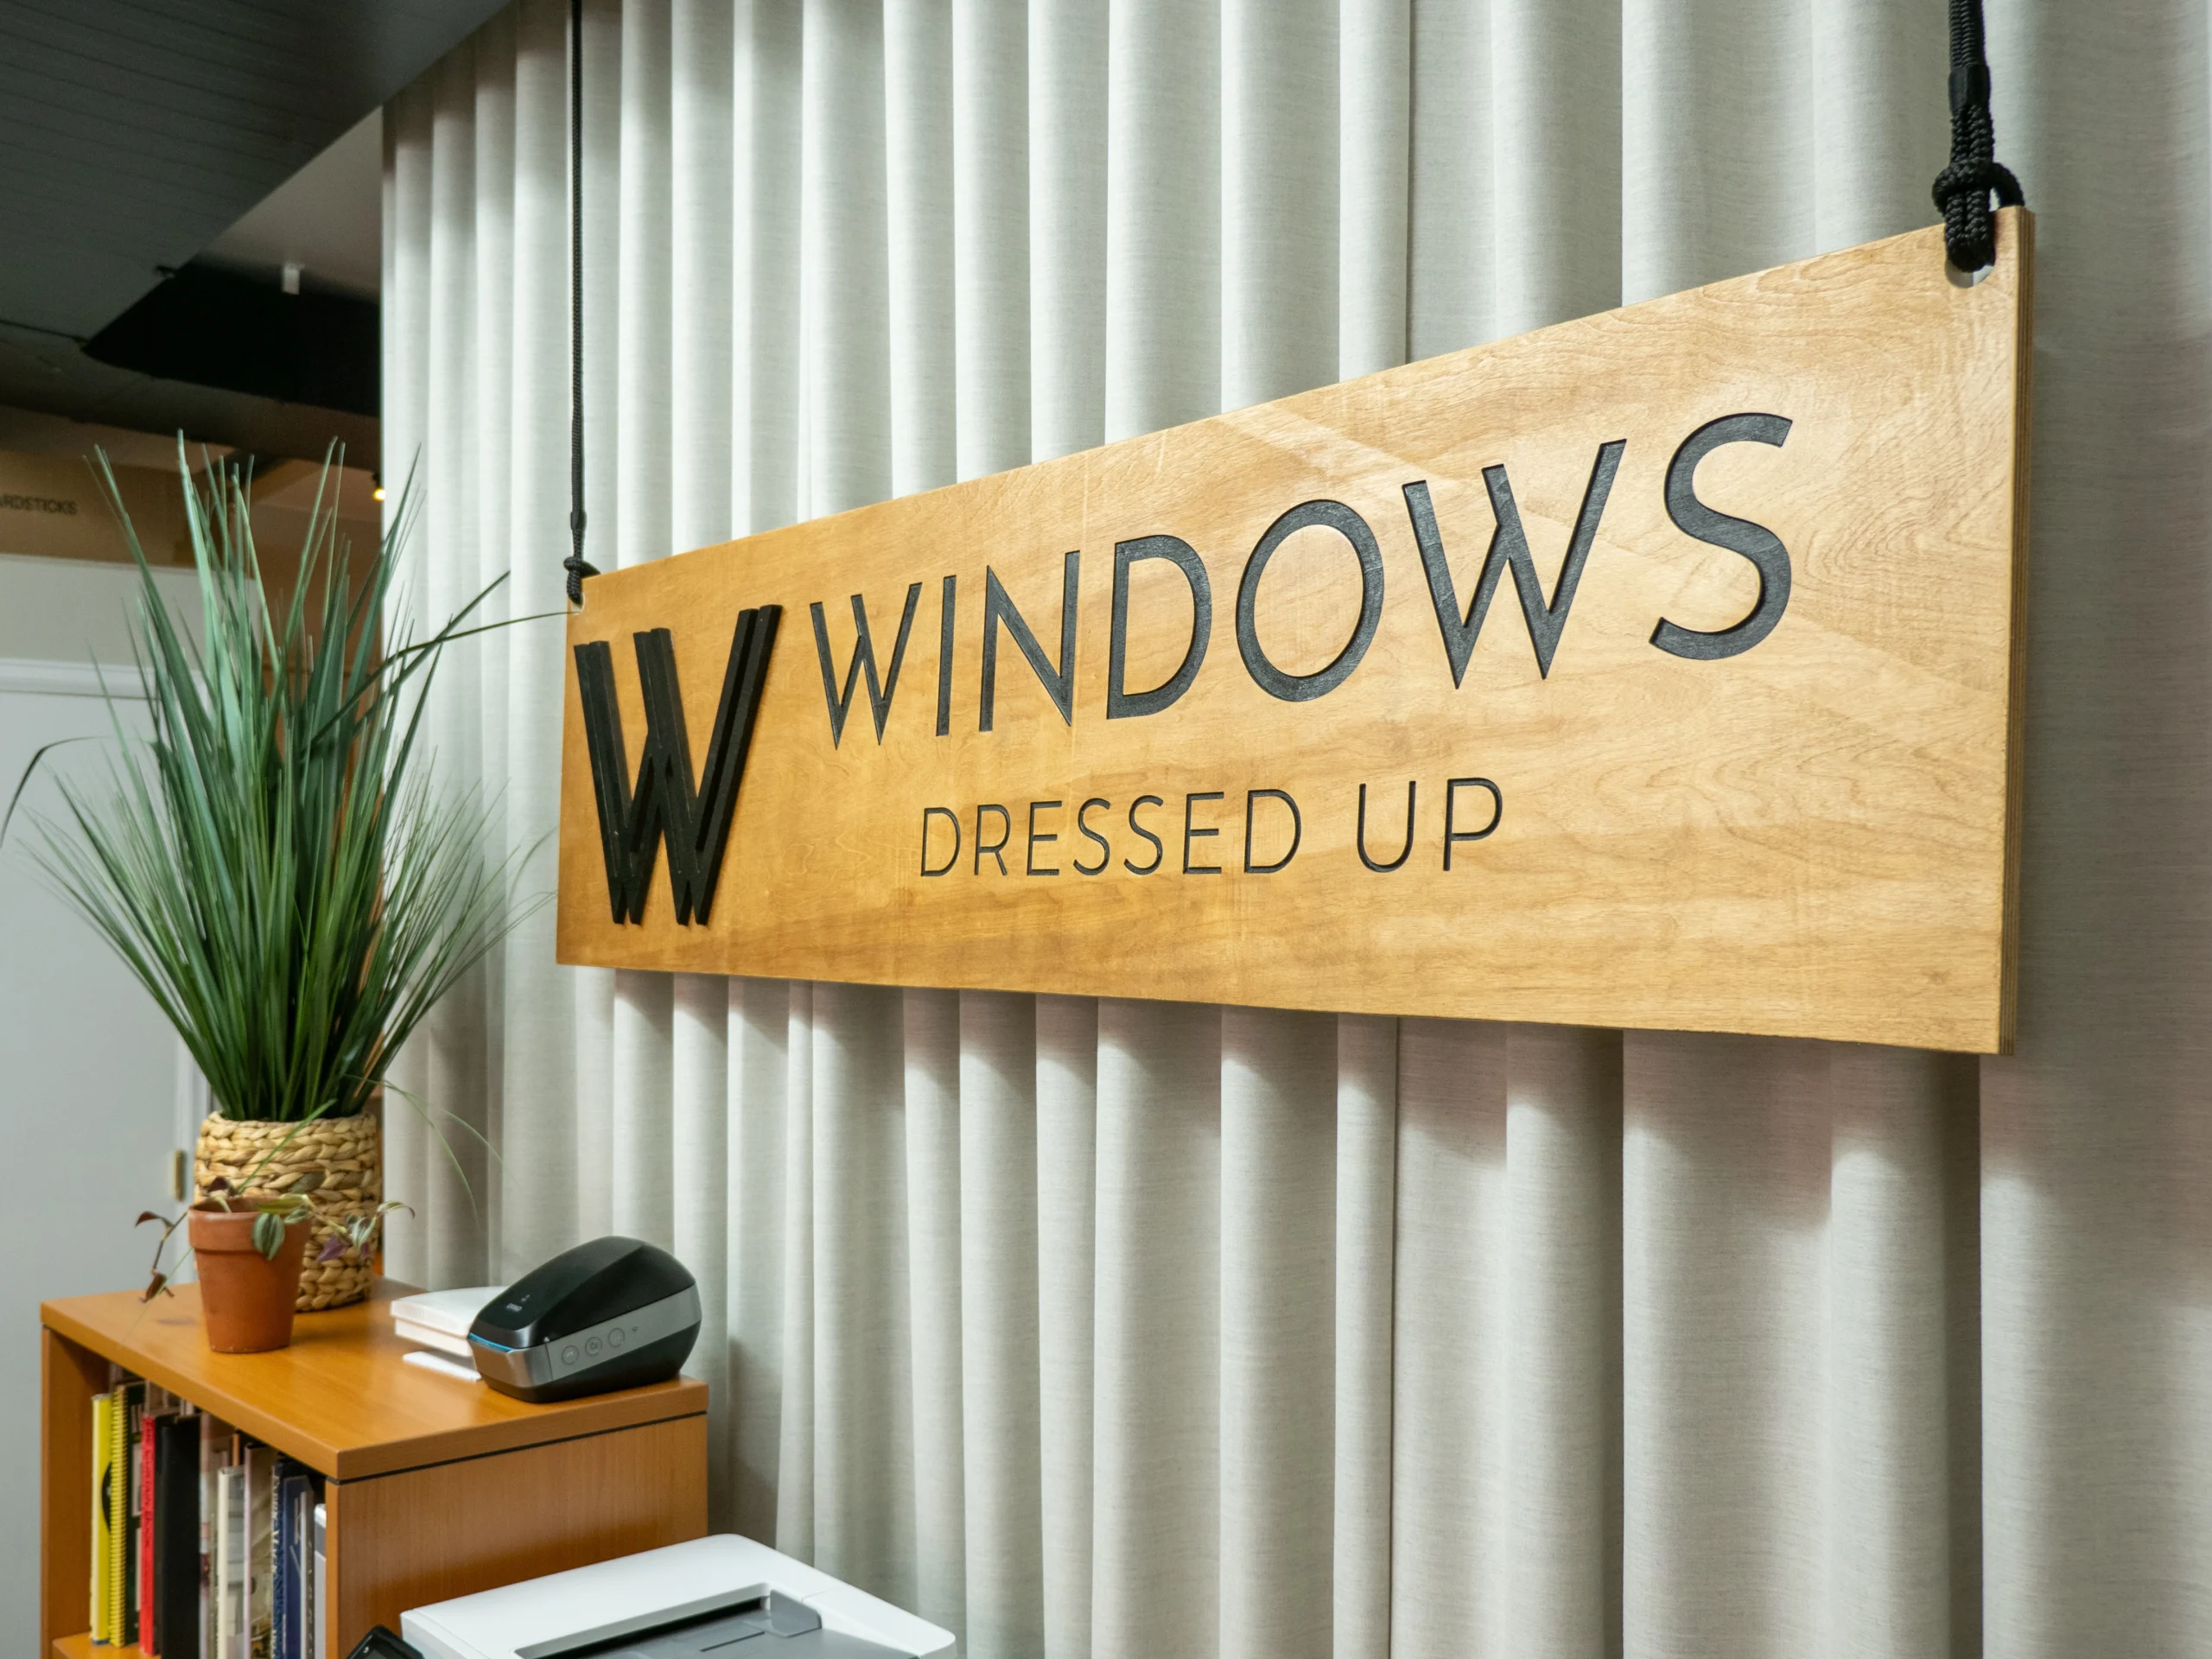 Wooden sign reading "windows dressed up" hanging in an office with a potted plant and window treatment in the background.